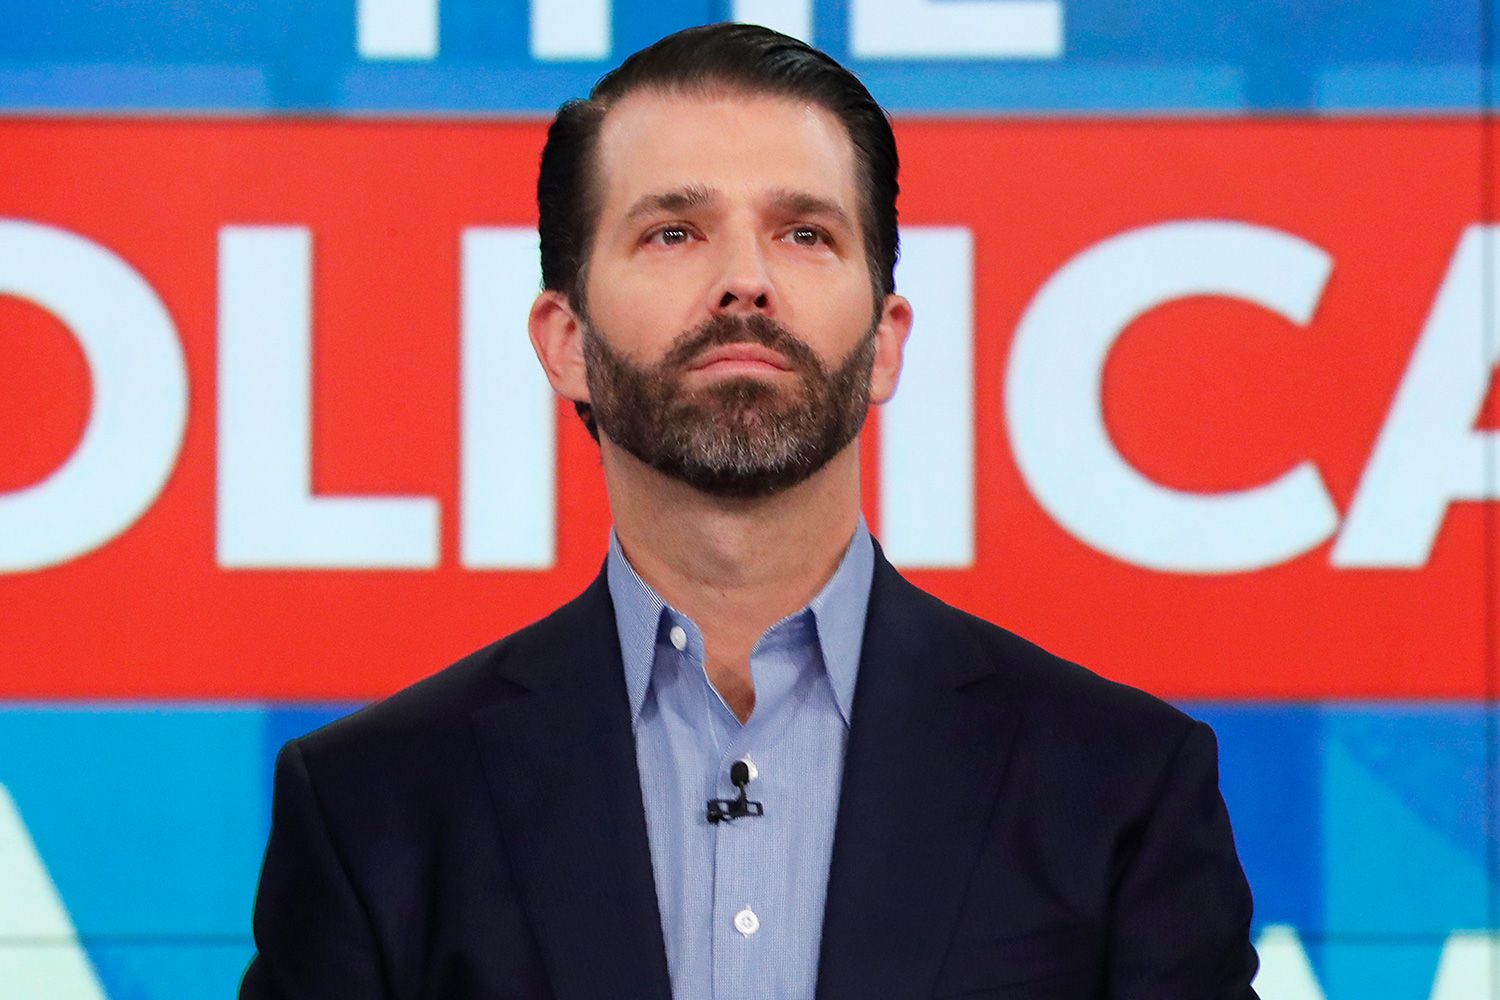 Donald Trump Jr reacts to Hunter Biden’s indictment, predicts another criminal case against his father